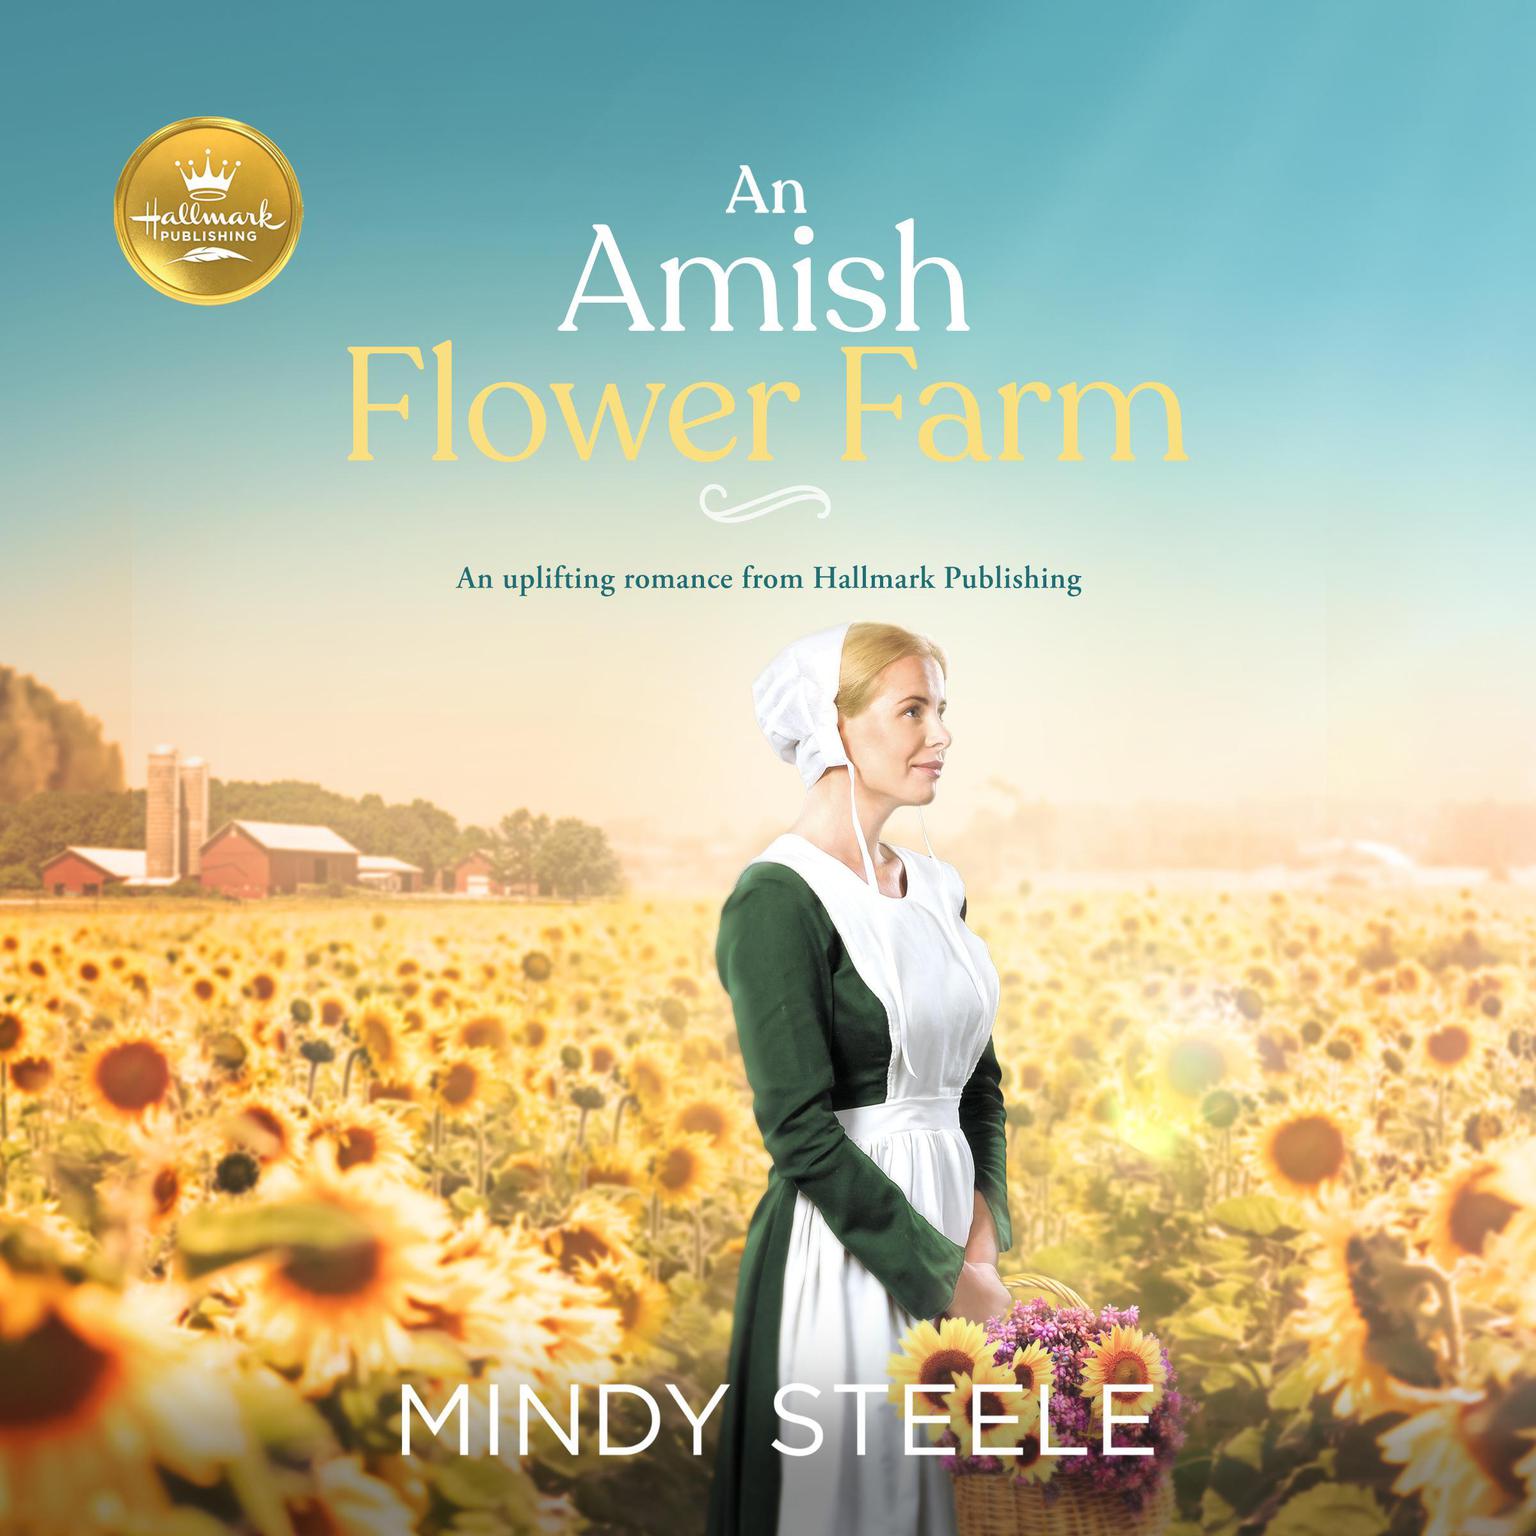 An Amish Flower Farm: An uplifting romance from Hallmark Publishing Audiobook, by Mindy Steele